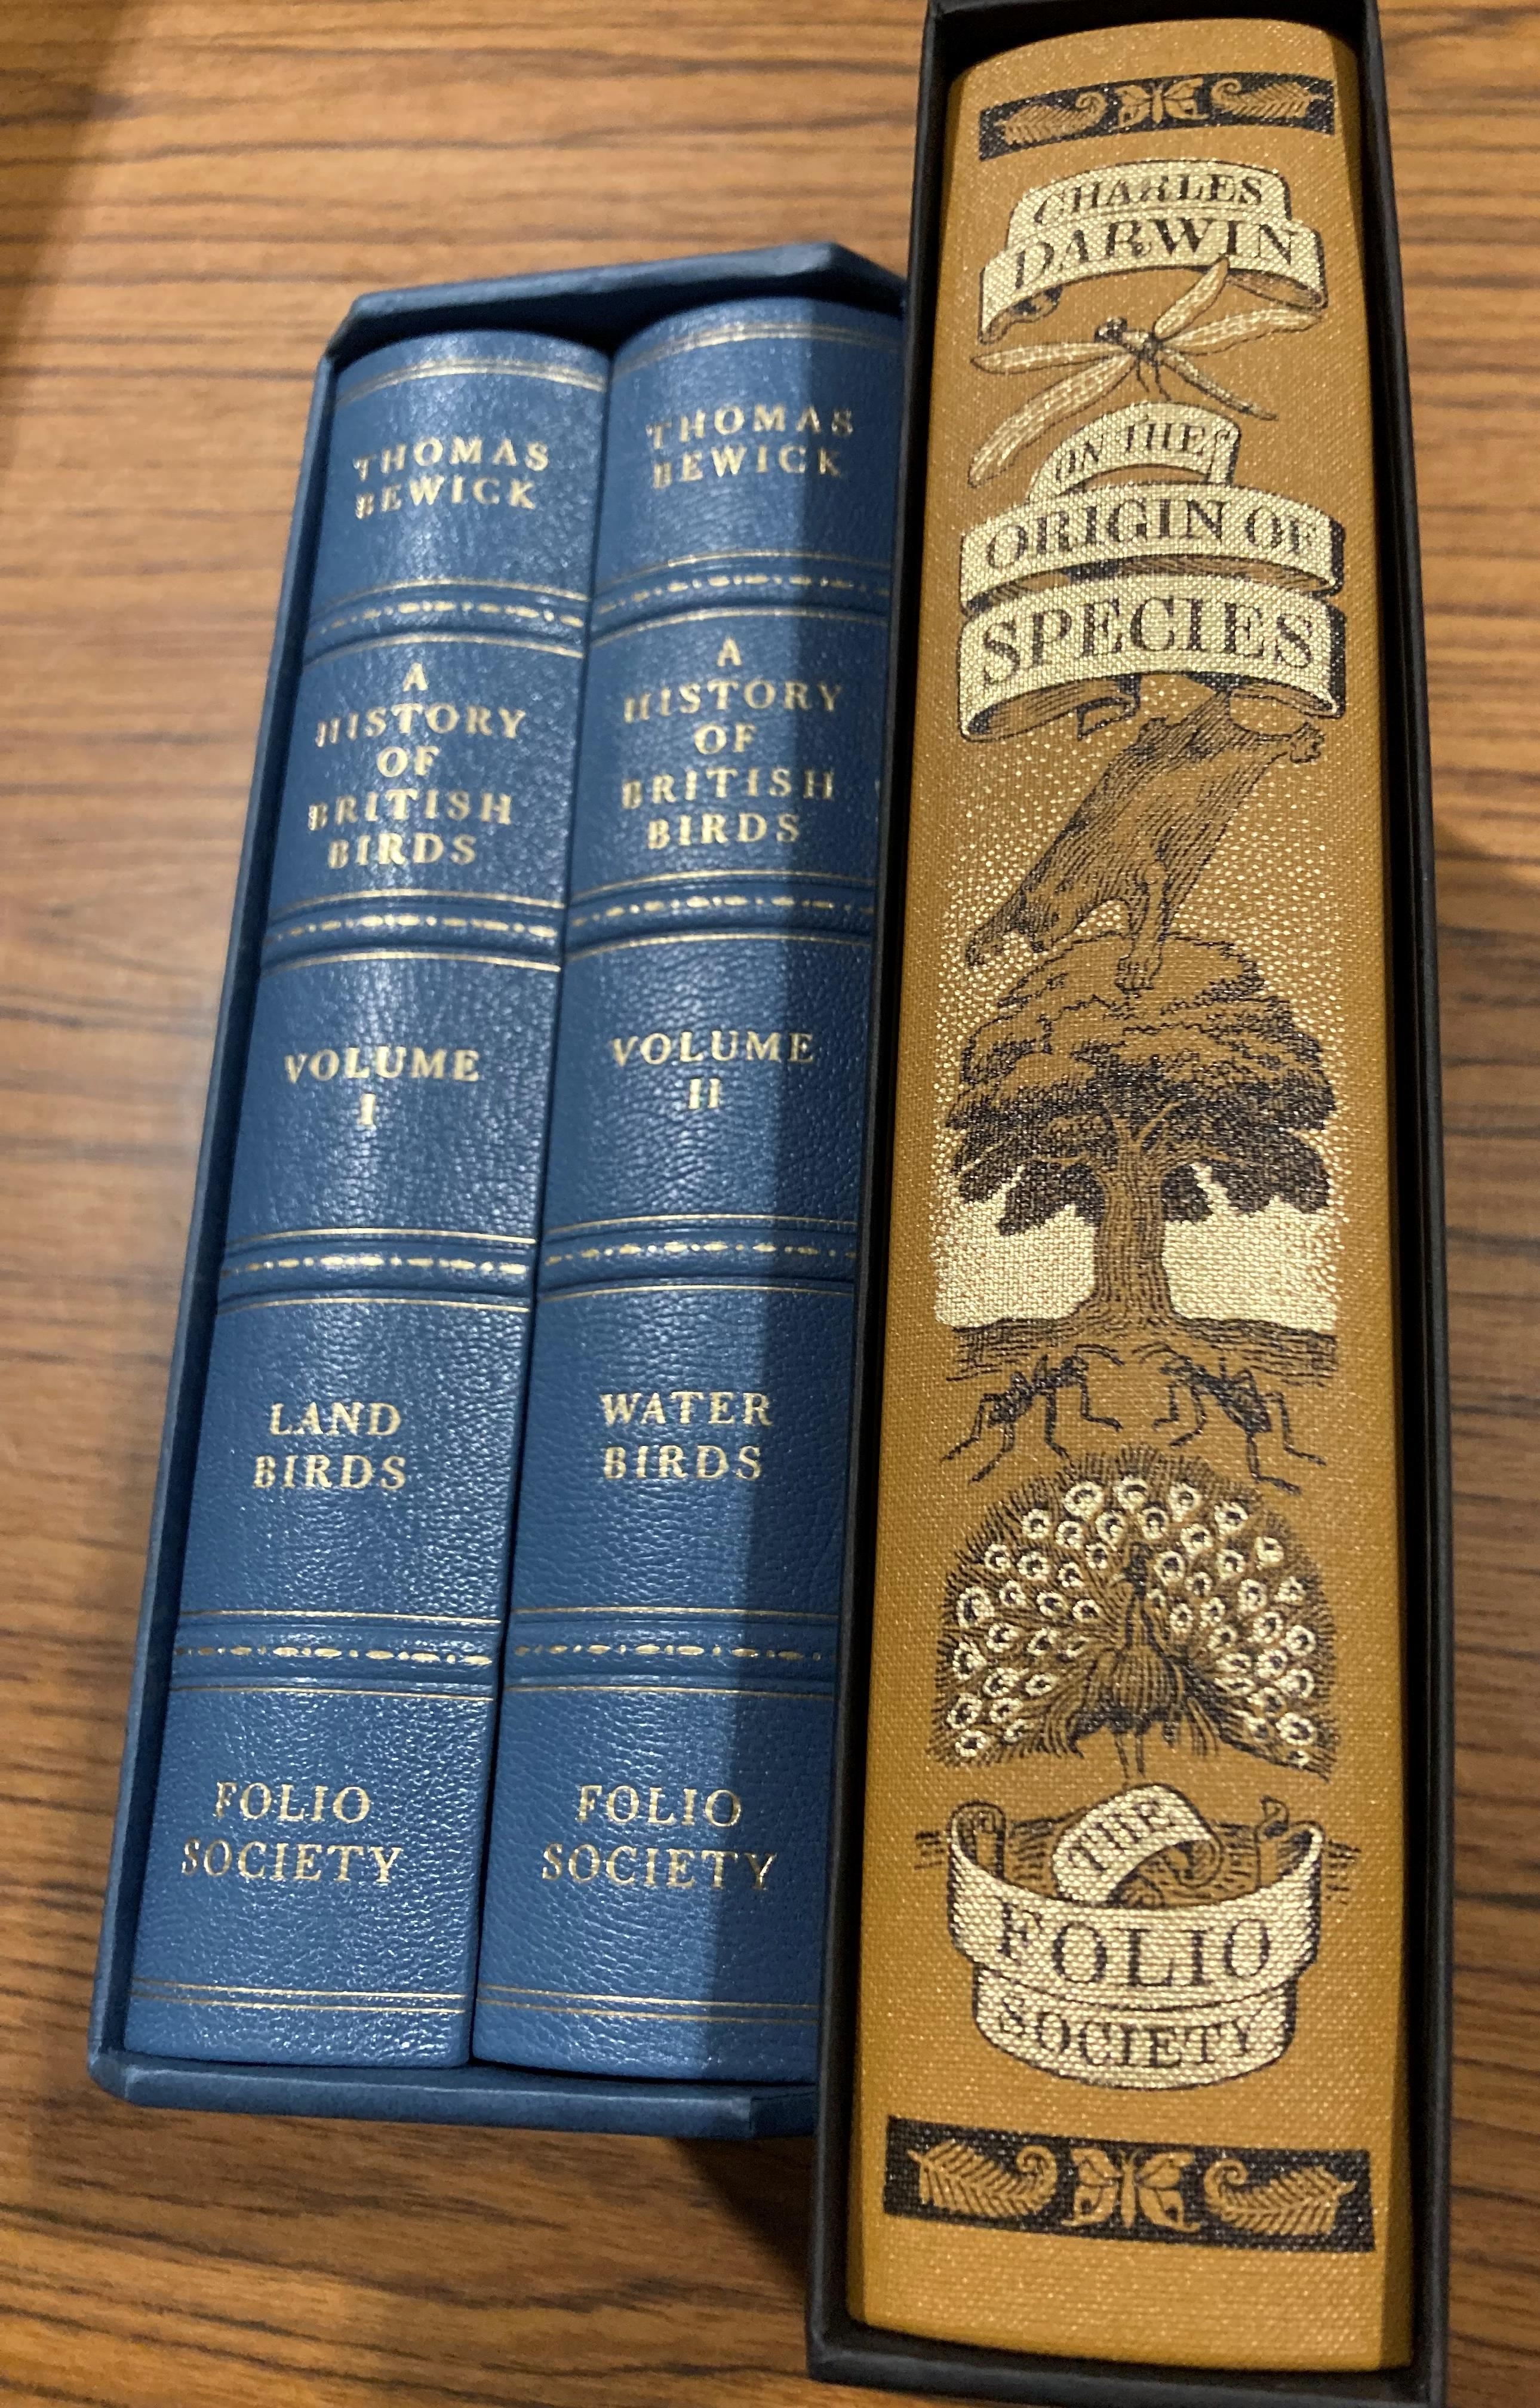 Folio Society - Thomas Bewick a two volumes set 'A History of British Birds' (in case) and Charles